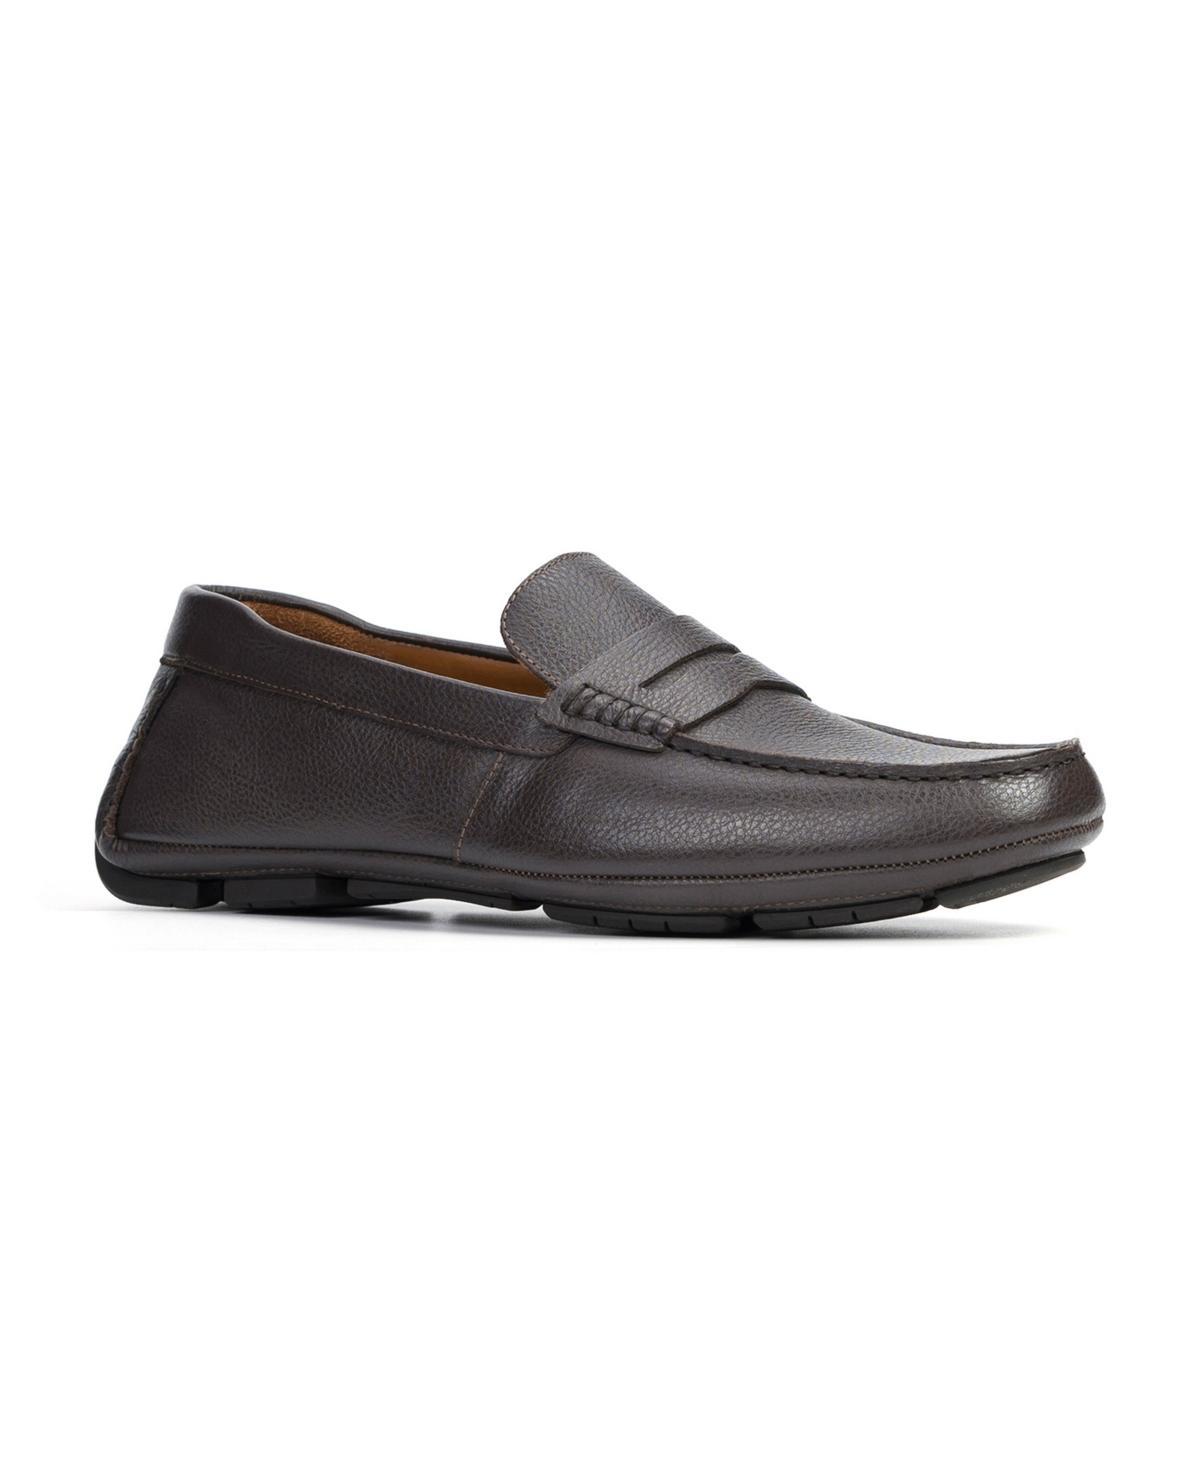 Anthony Veer Mens Cruise Driver Slip-On Leather Loafers Mens Shoes Product Image